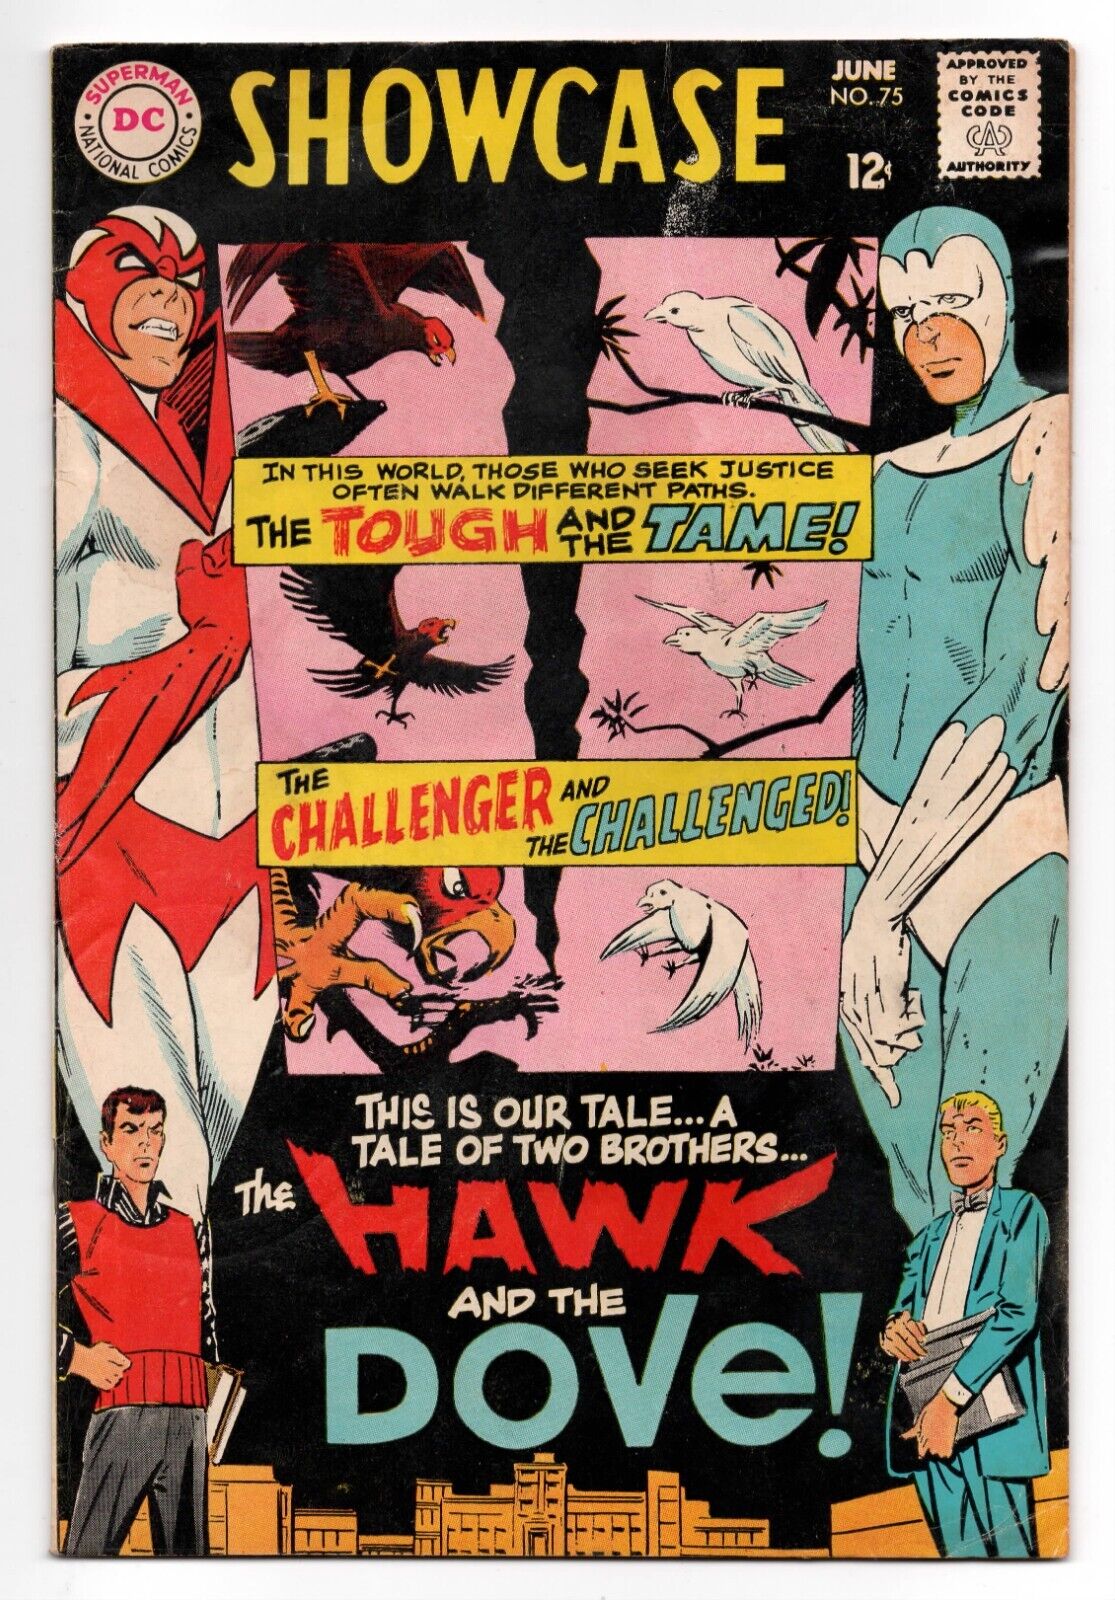 Showcase #75 (DC, 1968) 1st appearance Hawk and Dove, Steve Ditko | VG/FN 5.0